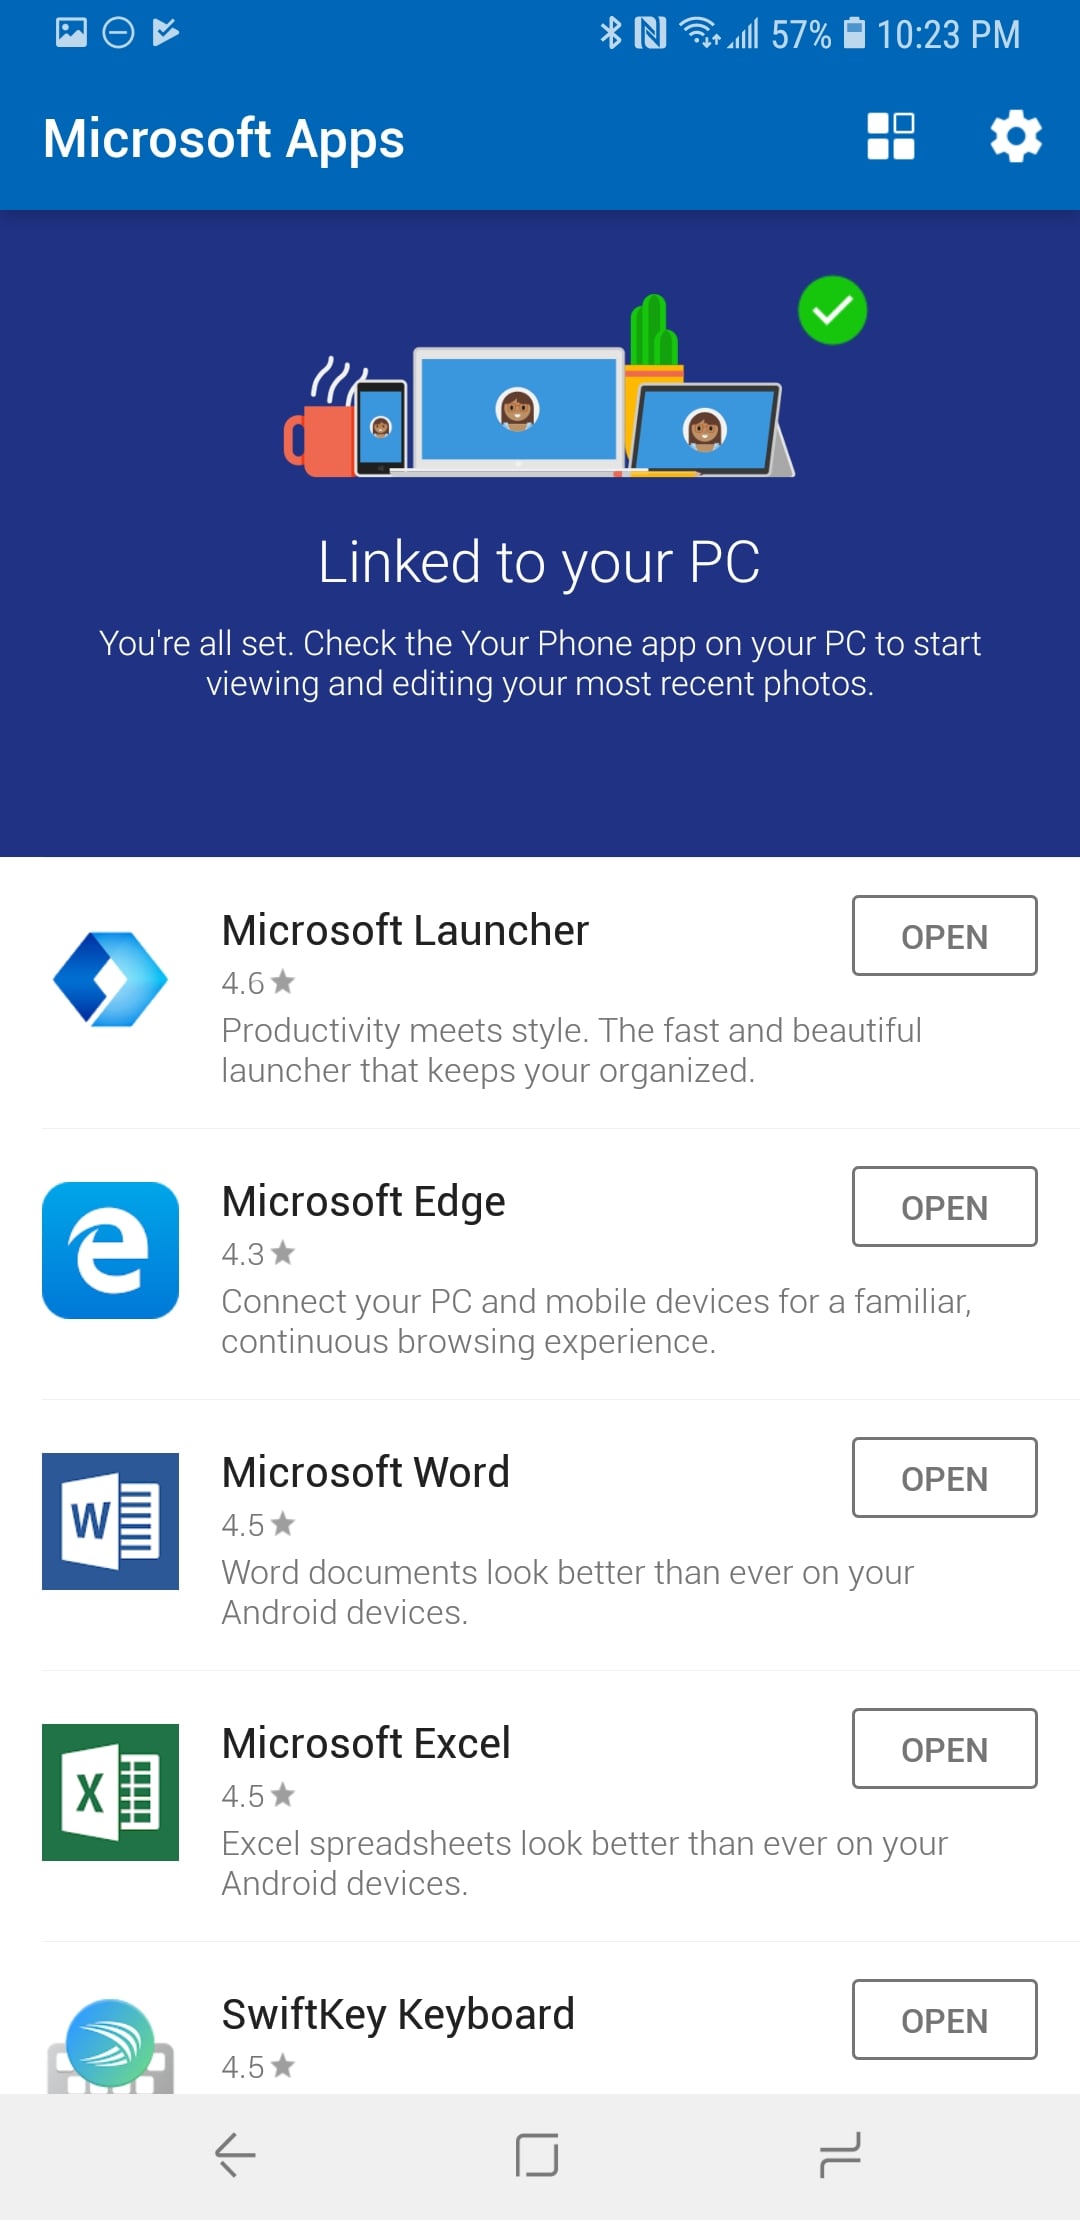 Microsoft Apps App on Android